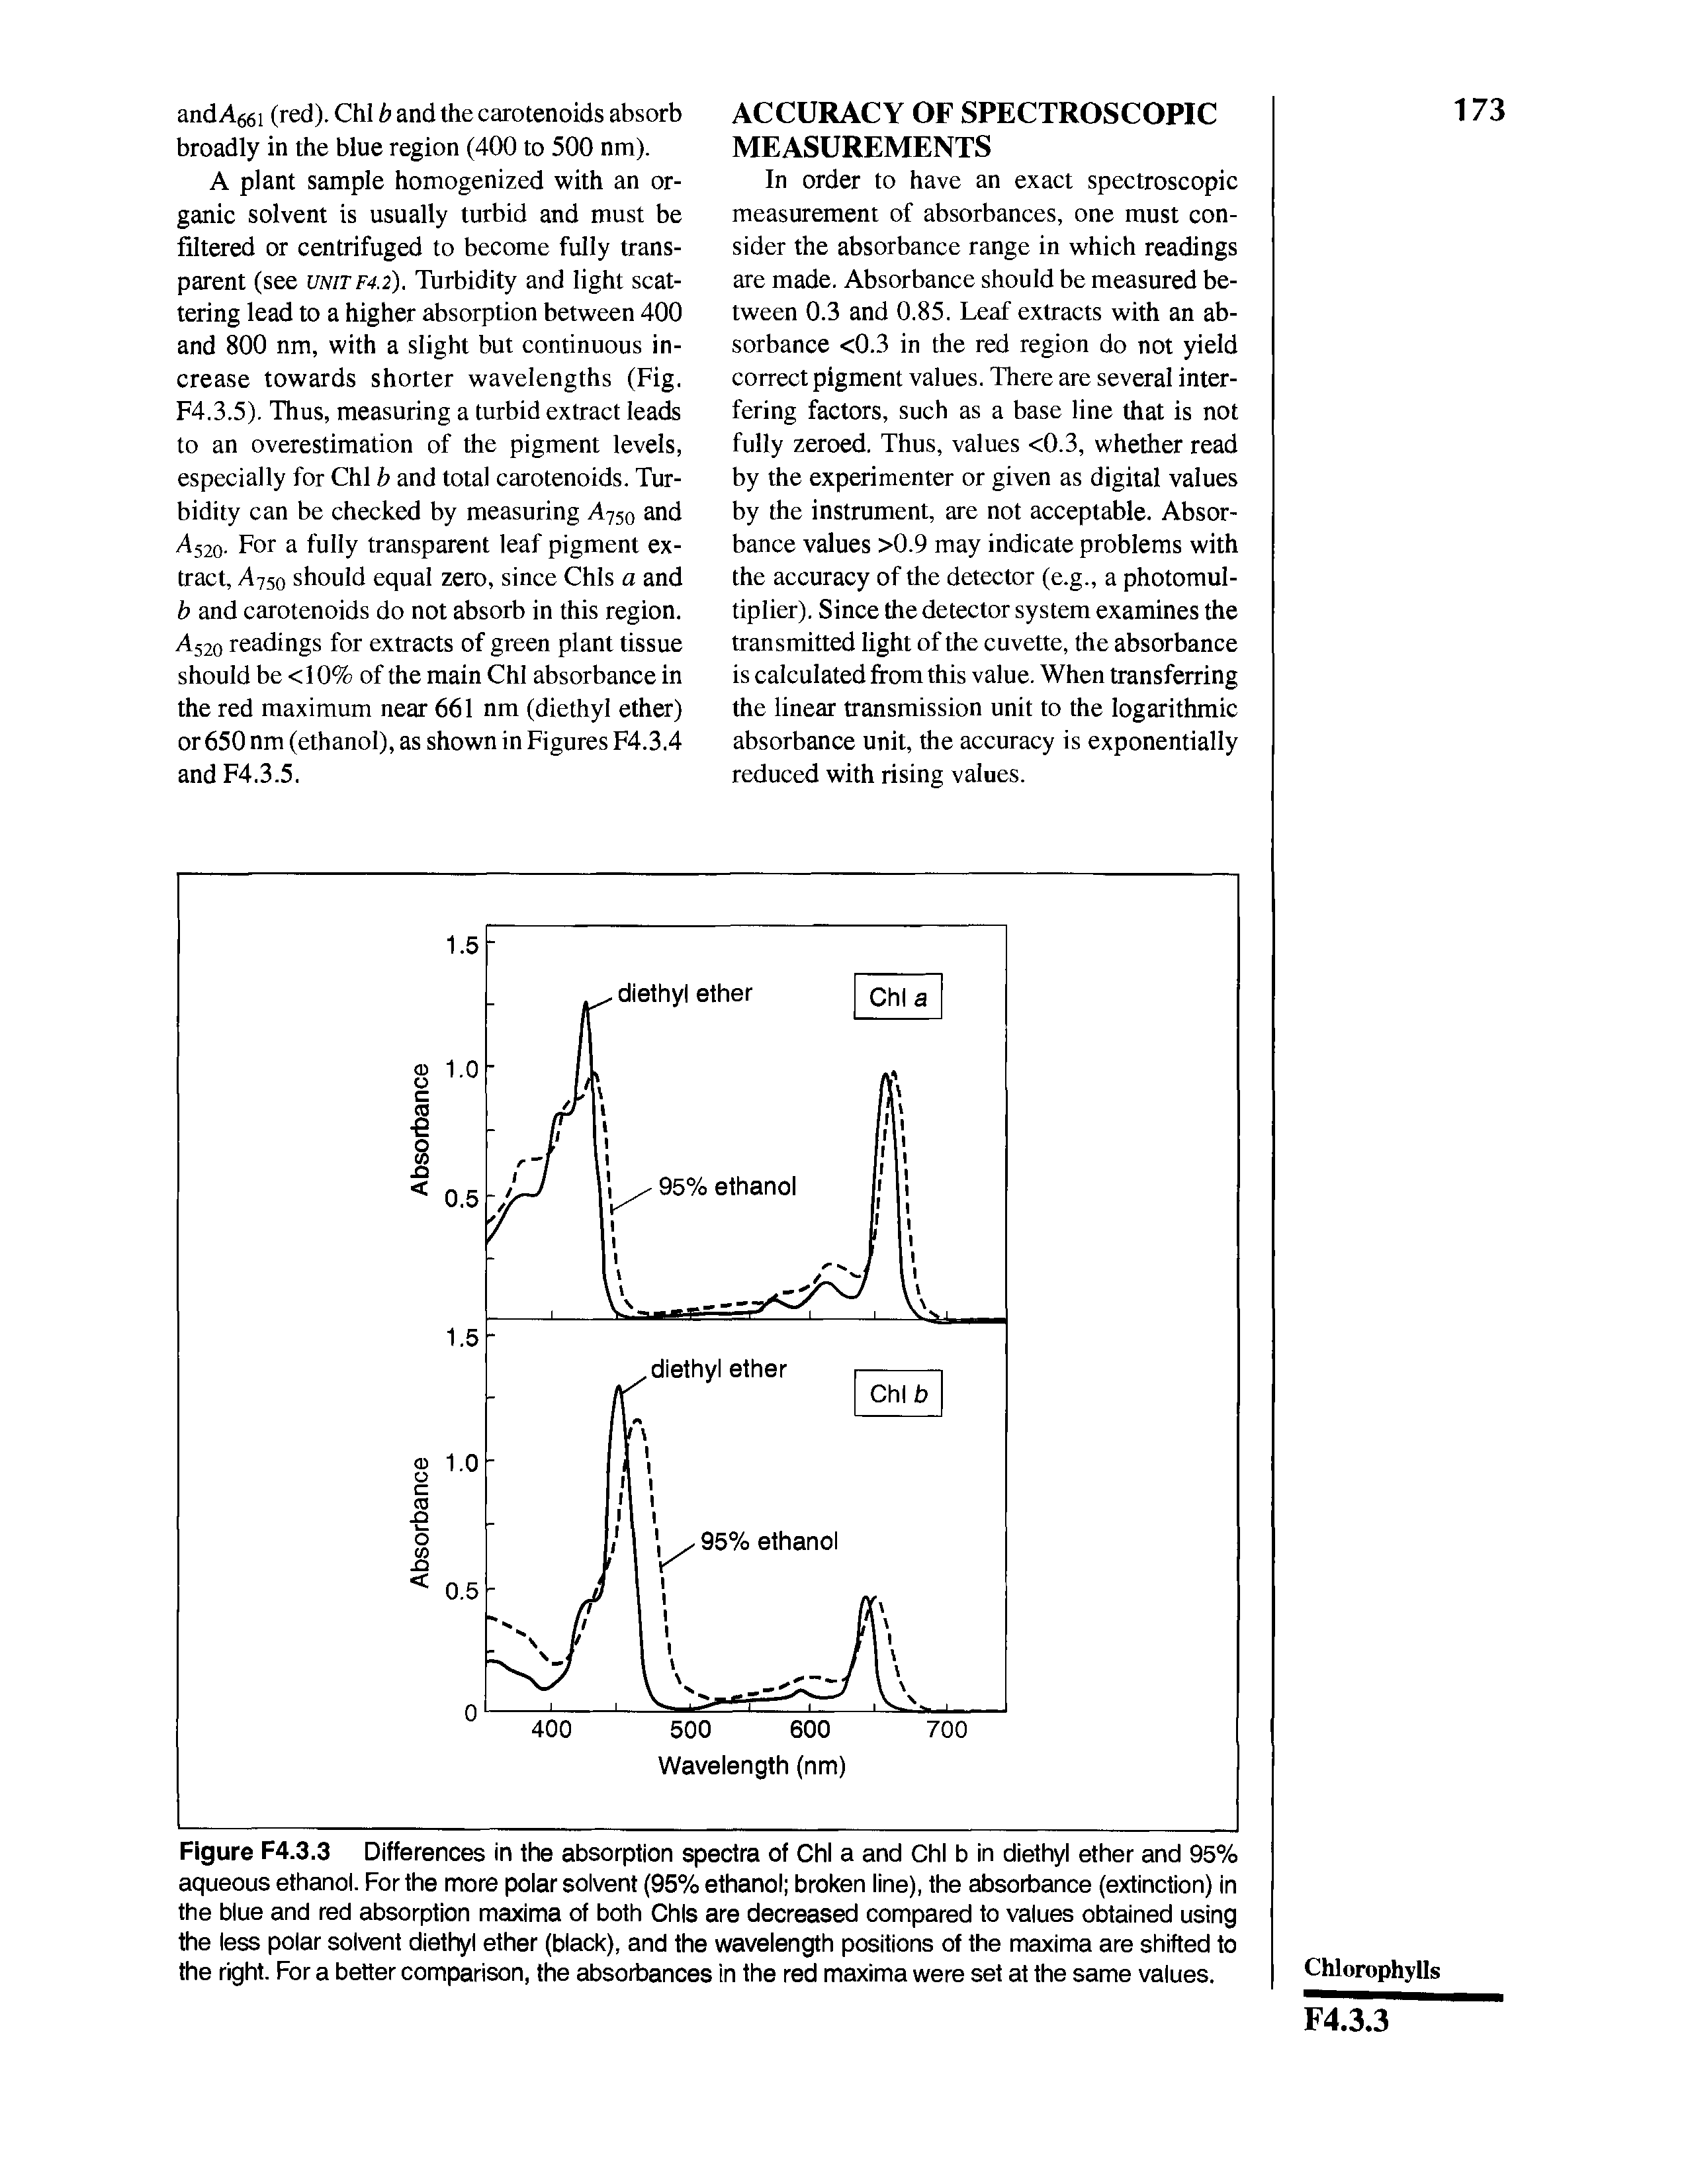 Figure F4.3.3 Differences in the absorption spectra of Chi a and Chi b in diethyl ether and 95% aqueous ethanol. For the more polar solvent (95% ethanol broken line), the absorbance (extinction) in the blue and red absorption maxima of both Chls are decreased compared to values obtained using the less polar solvent diethyl ether (black), and the wavelength positions of the maxima are shifted to the right. For a better comparison, the absorbances in the red maxima were set at the same values.